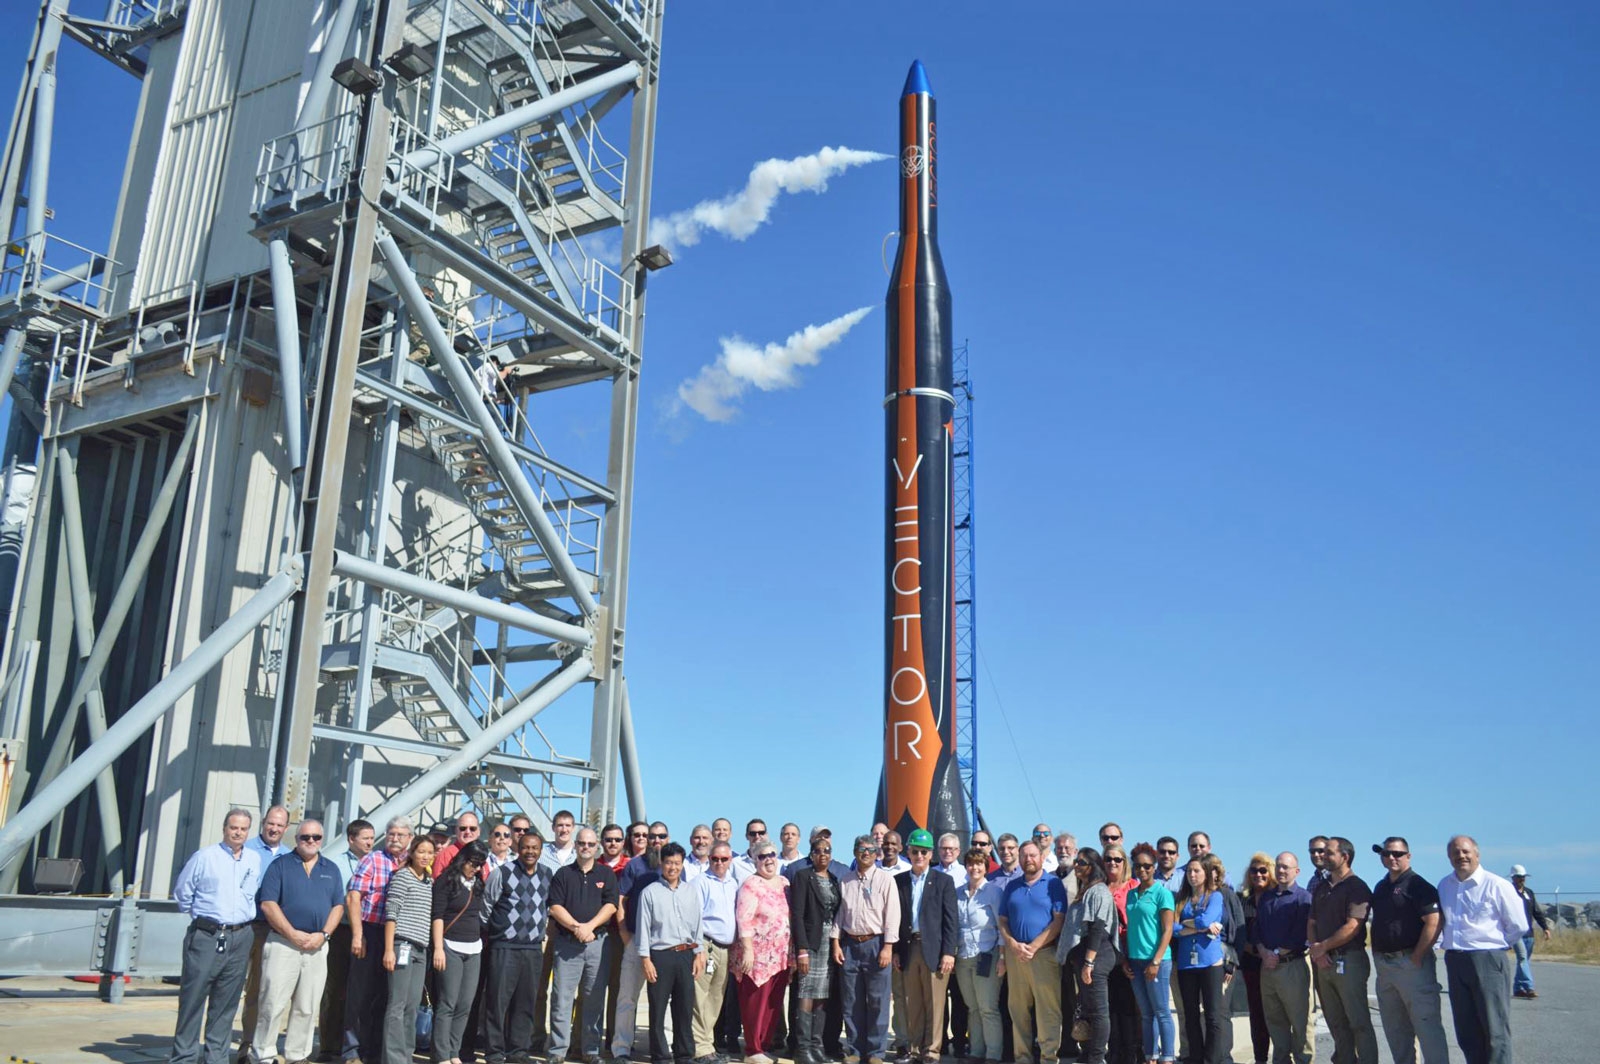 Vector plans three 'microsatellite' launches in Virginia | DeviceDaily.com